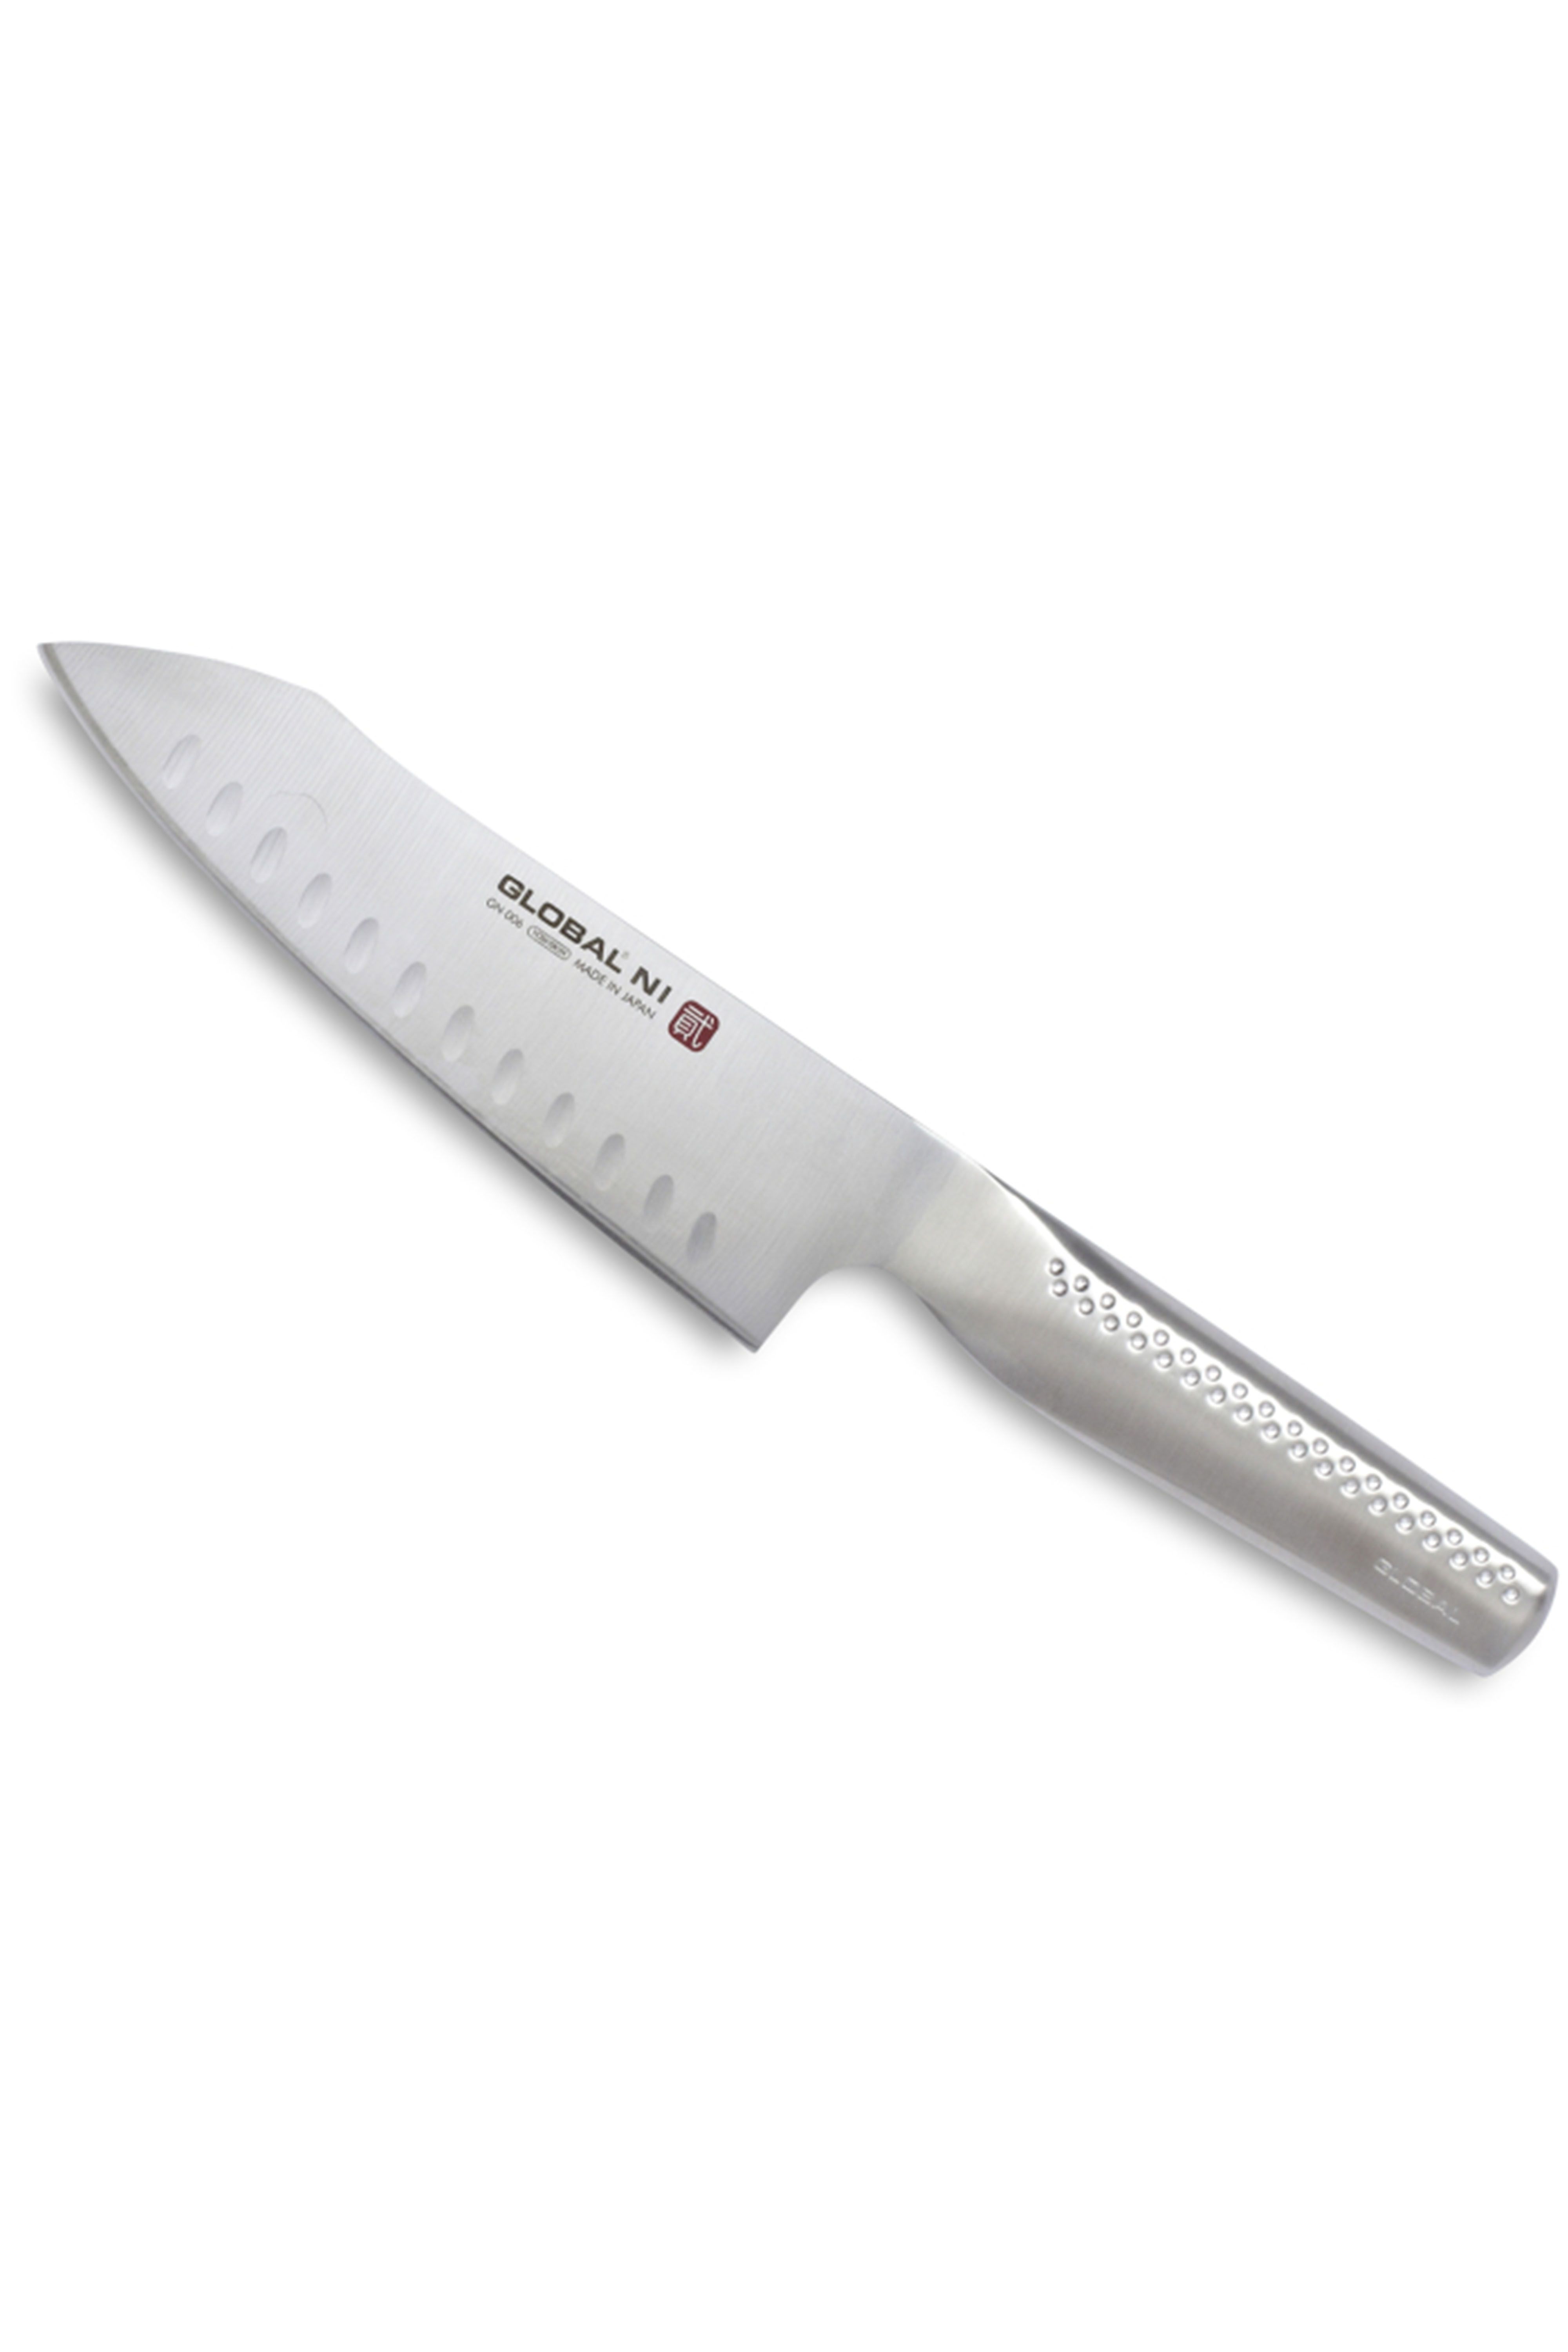 10 Best Kitchen Knives You Need - Top Rated Cutlery and Chef Knife ...